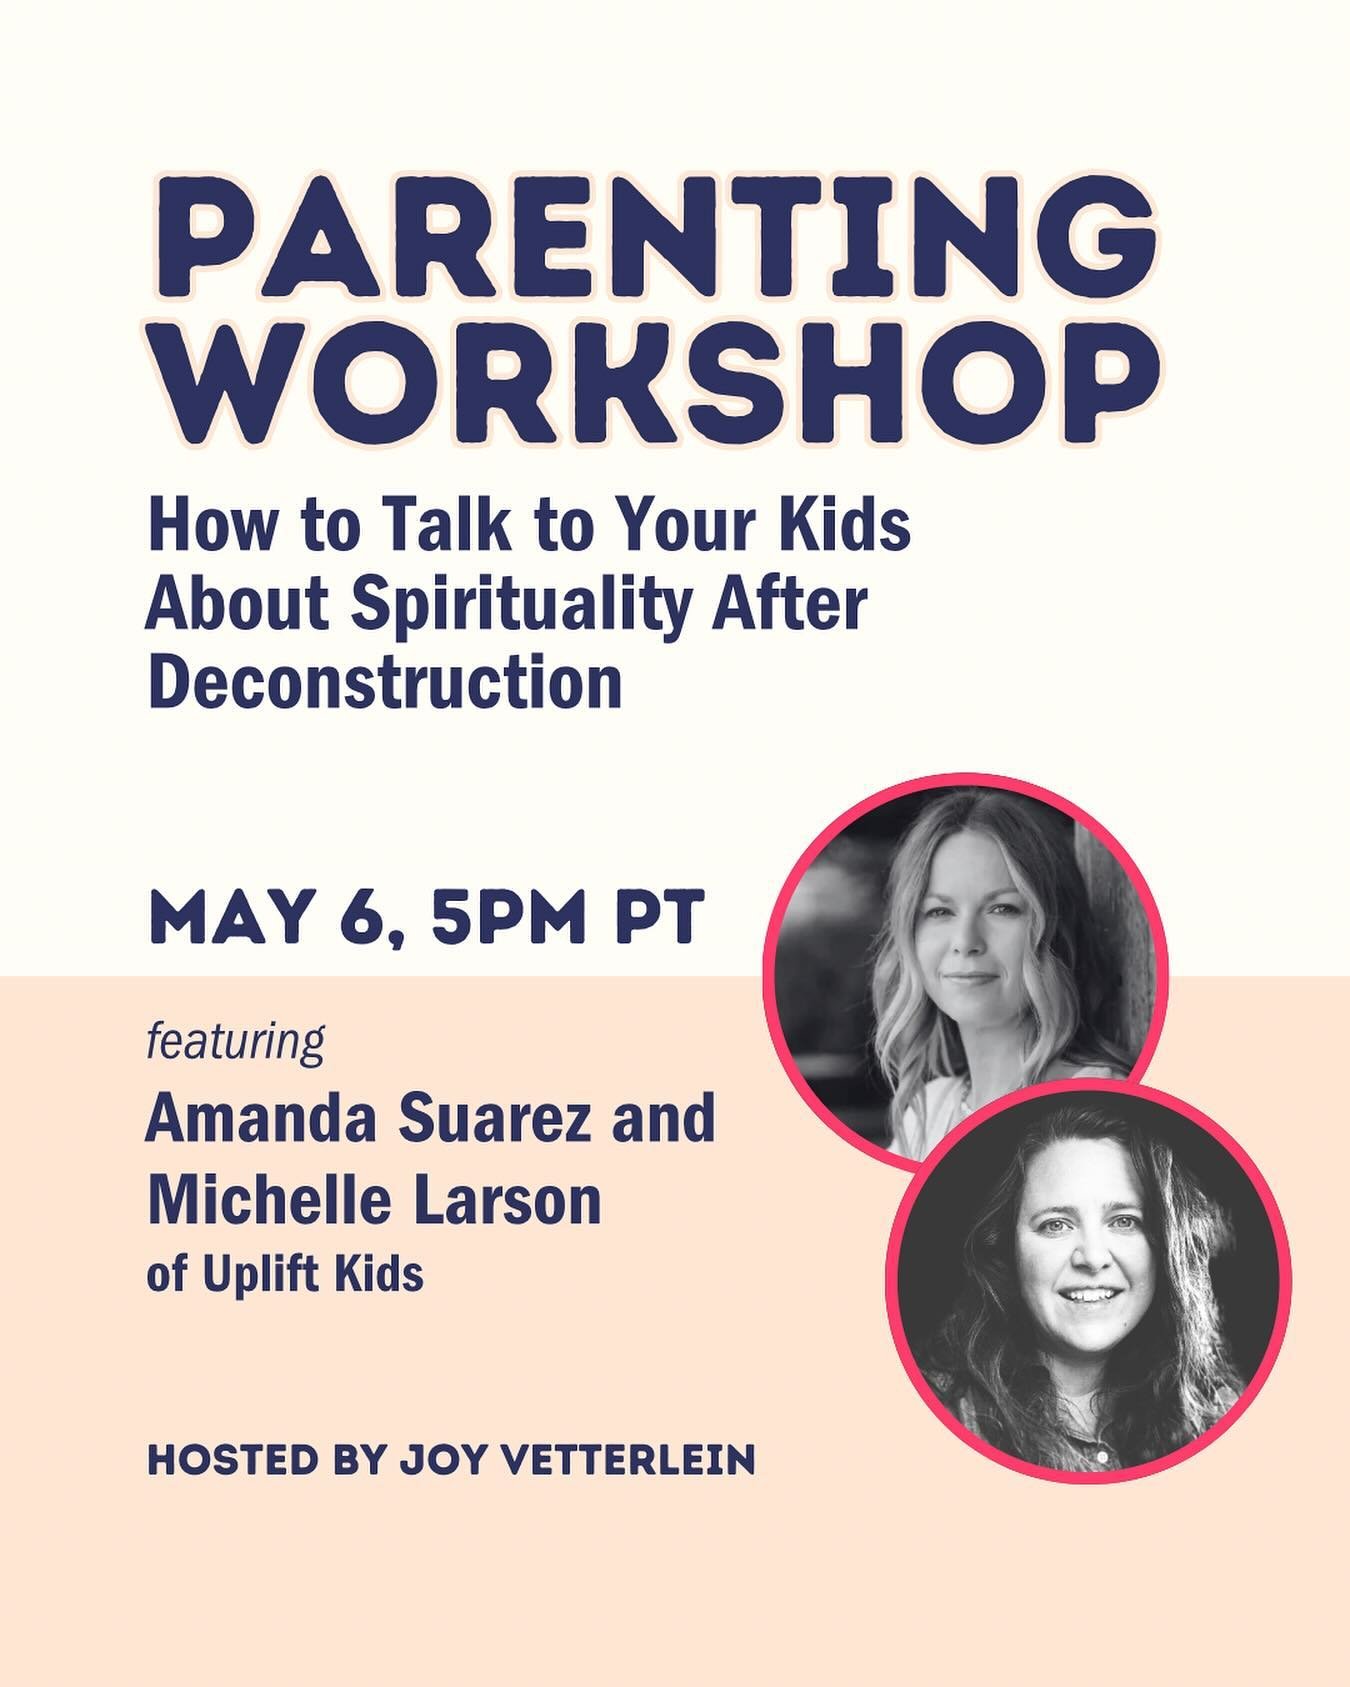 Calling all parents wondering how to nurture your kids&rsquo; spirituality!!!

I&rsquo;m so excited to host this panel convo workshop with two women who have dug deep into the science, research and best practices for nurturing meaningful spirituality